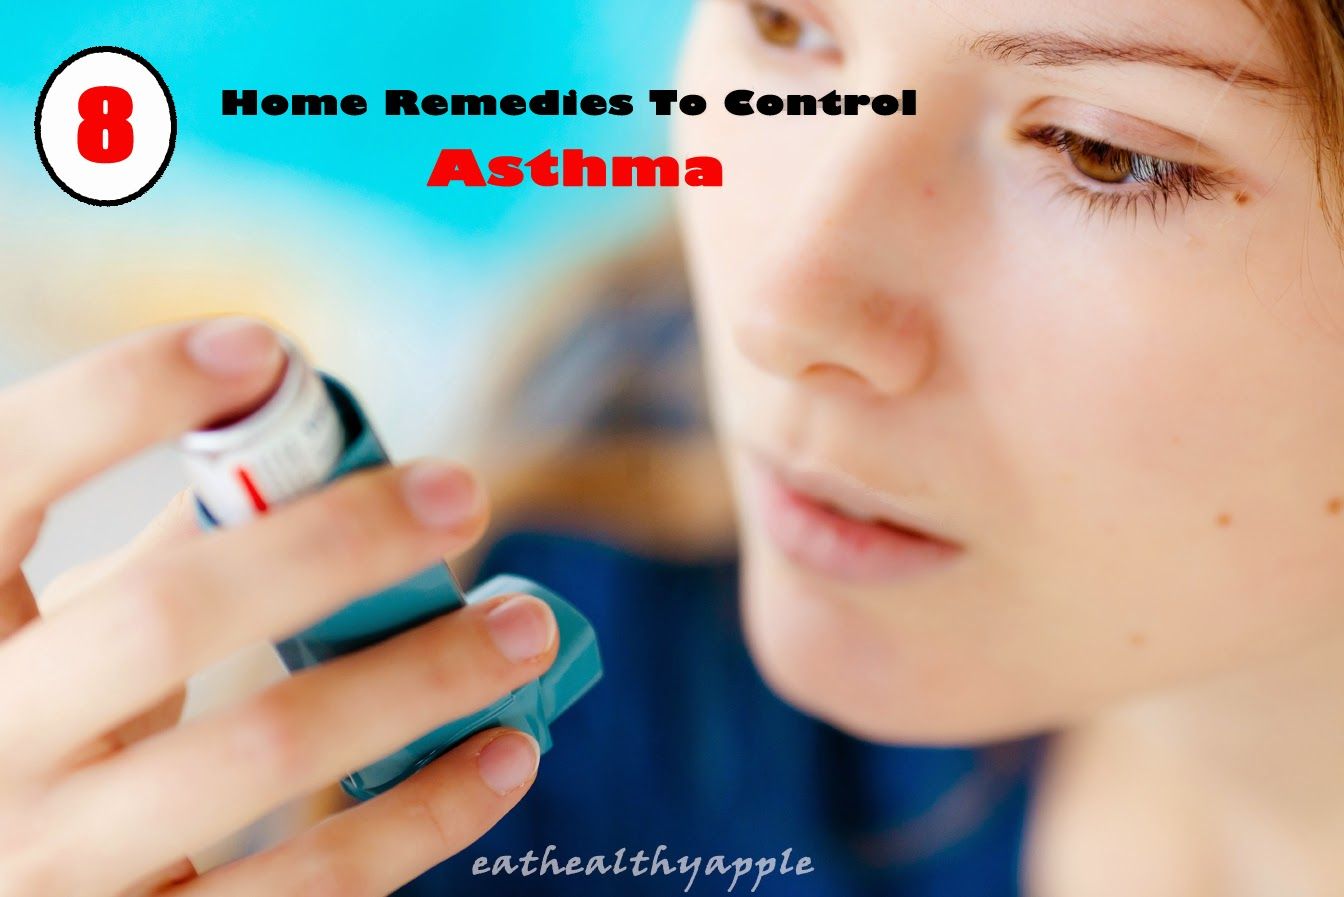 8 Home Remedies to Control Asthma